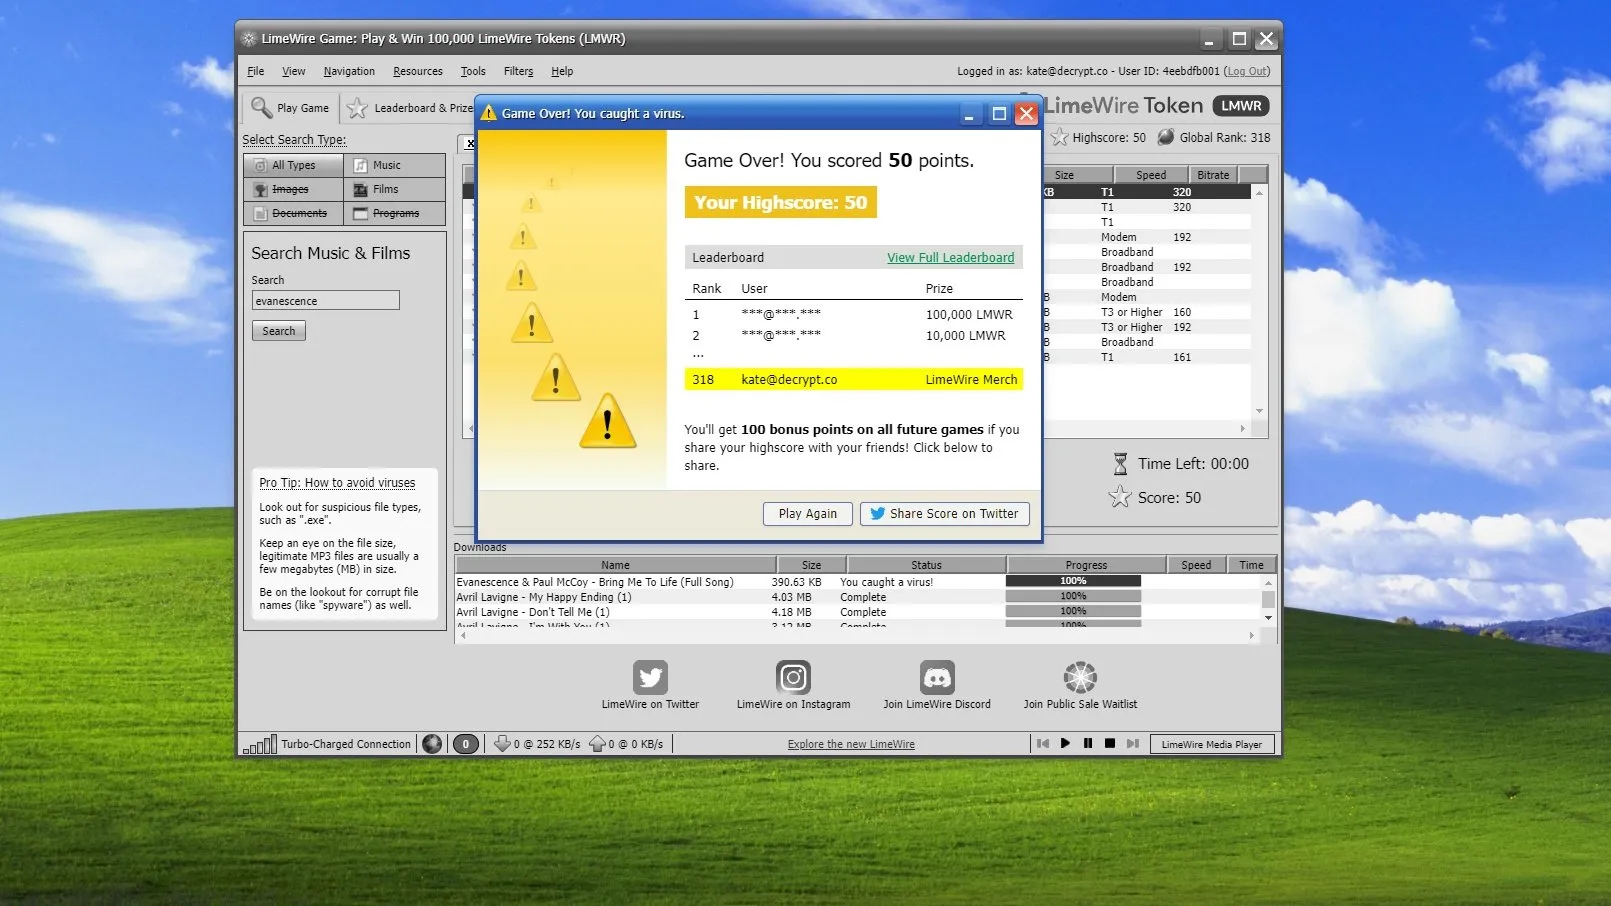 screenshot from LimeWire browser game, showing Windows desktop background with rolling green hills and blue sky with fake LimeWire client overtop. Software shows that user has earned 50 points but downloaded a virus.